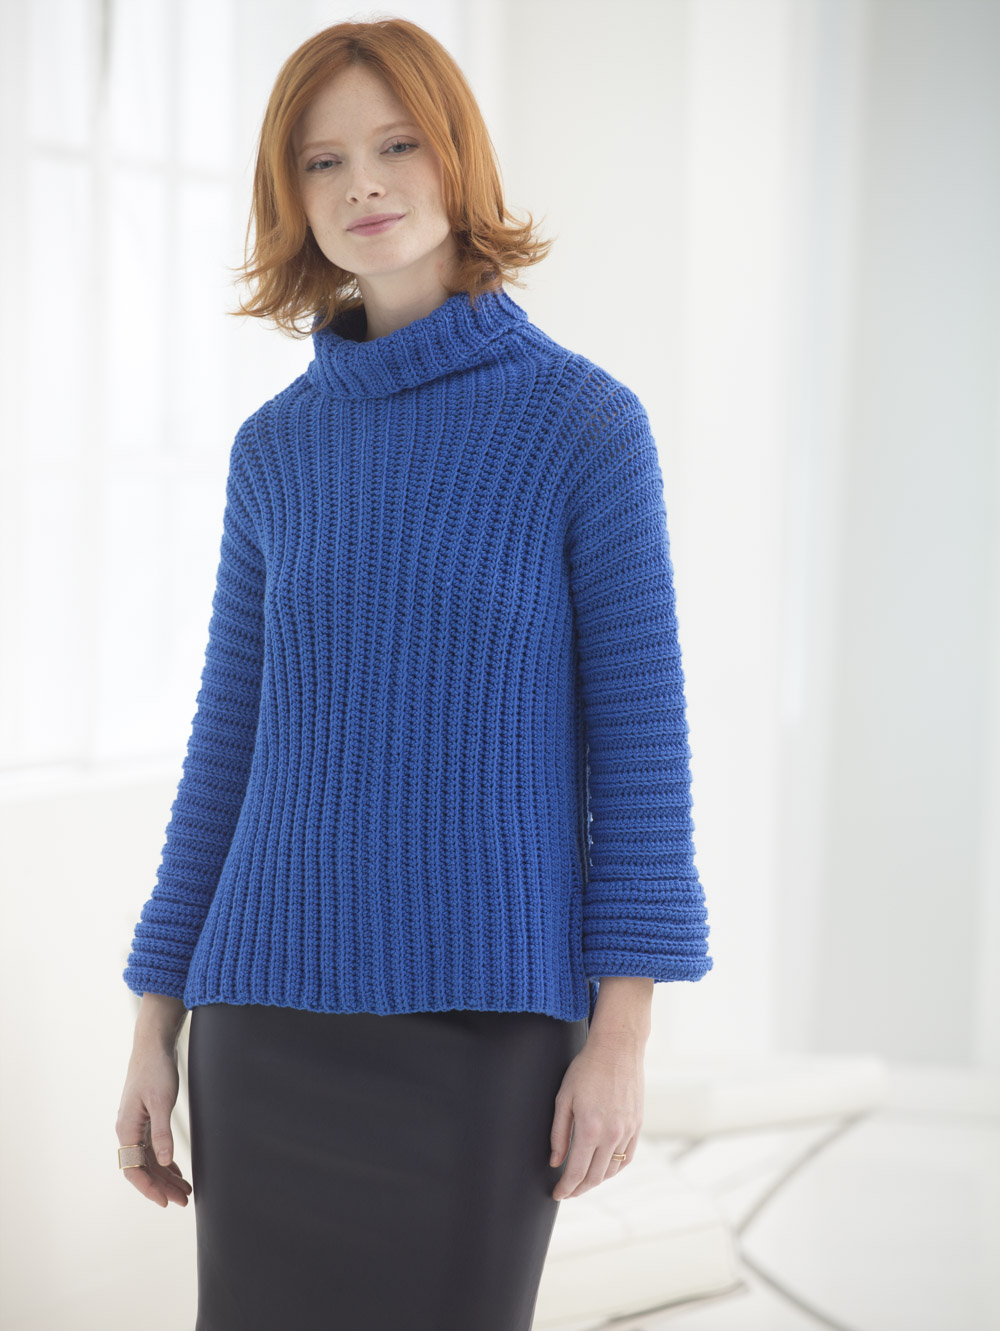 Crochet Simply Constructed Pullover